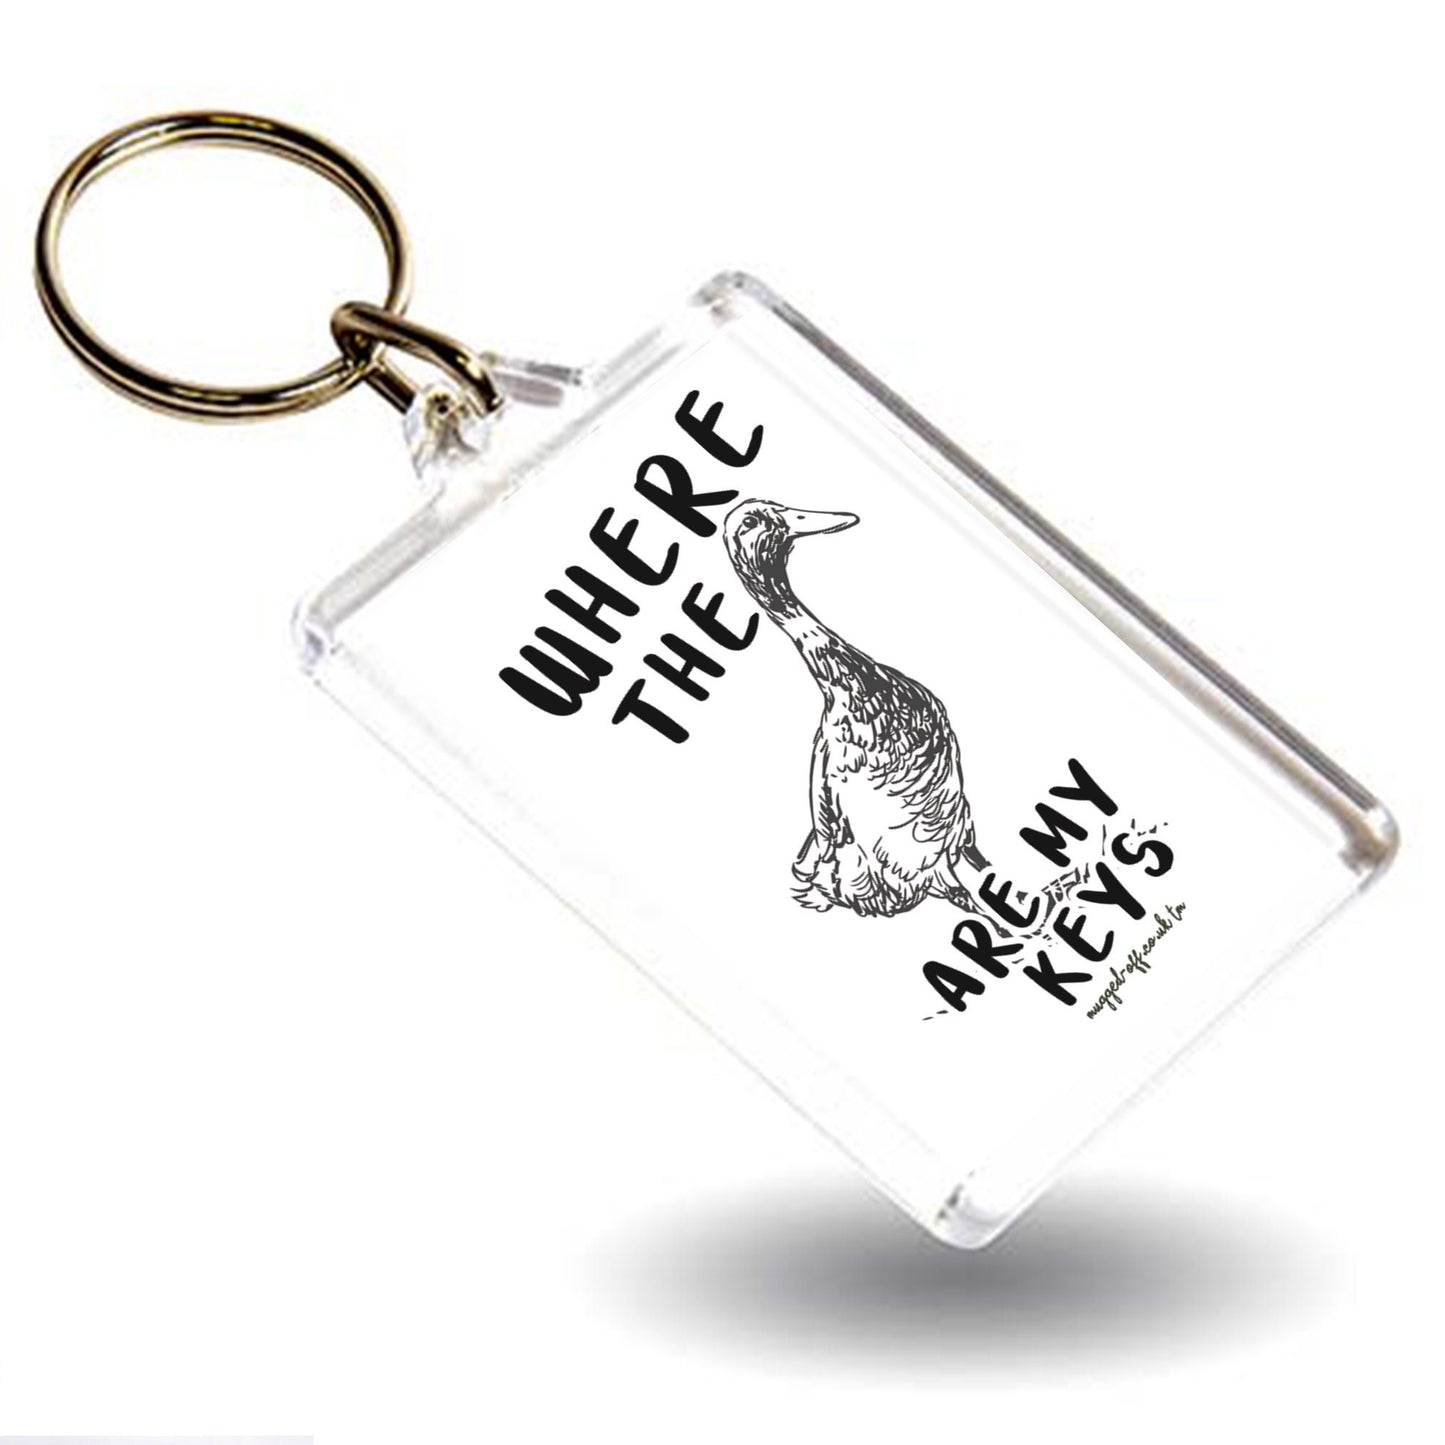 Housewarming Keyring Great Housewarming Gift Present For Him For Her keychain Lost keys funny. First Home / Moving Gift